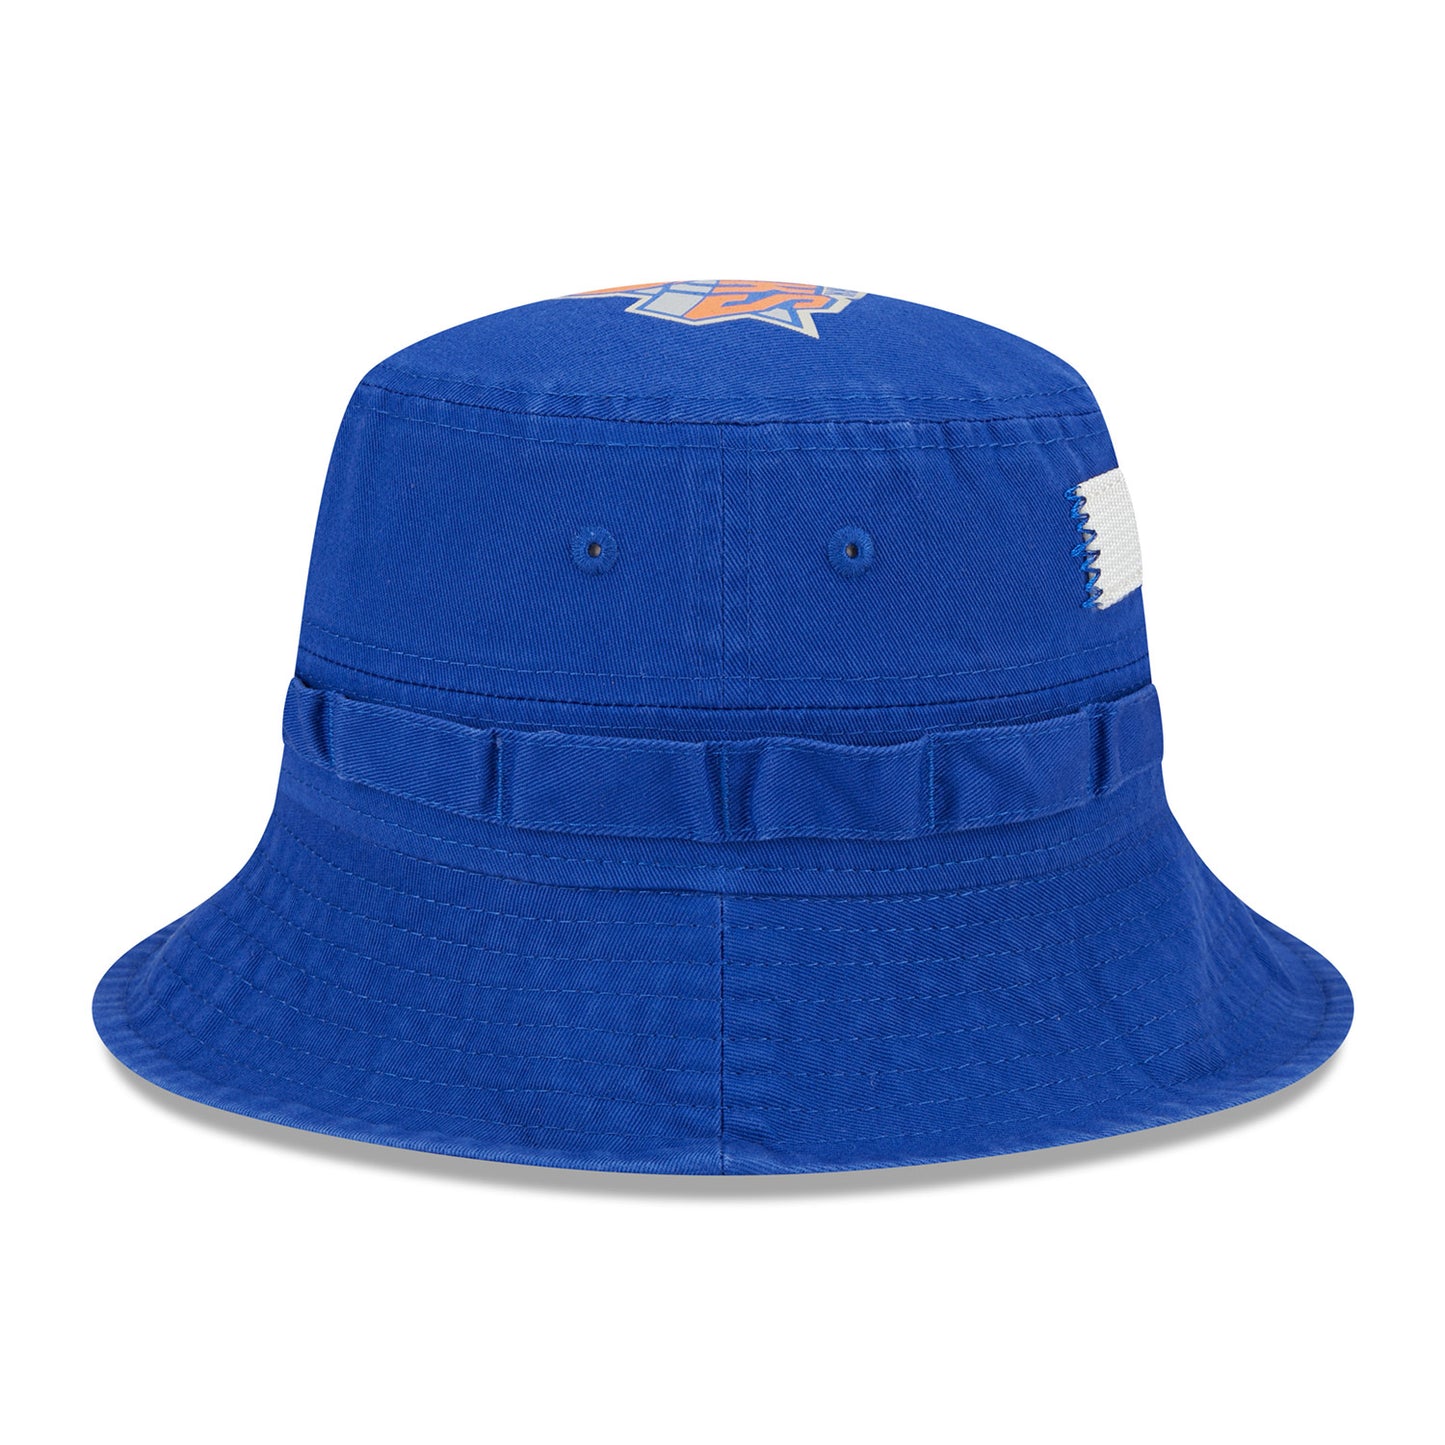 New Era Knicks Alpha Collection Bucket Hat In Blue - Side View 2